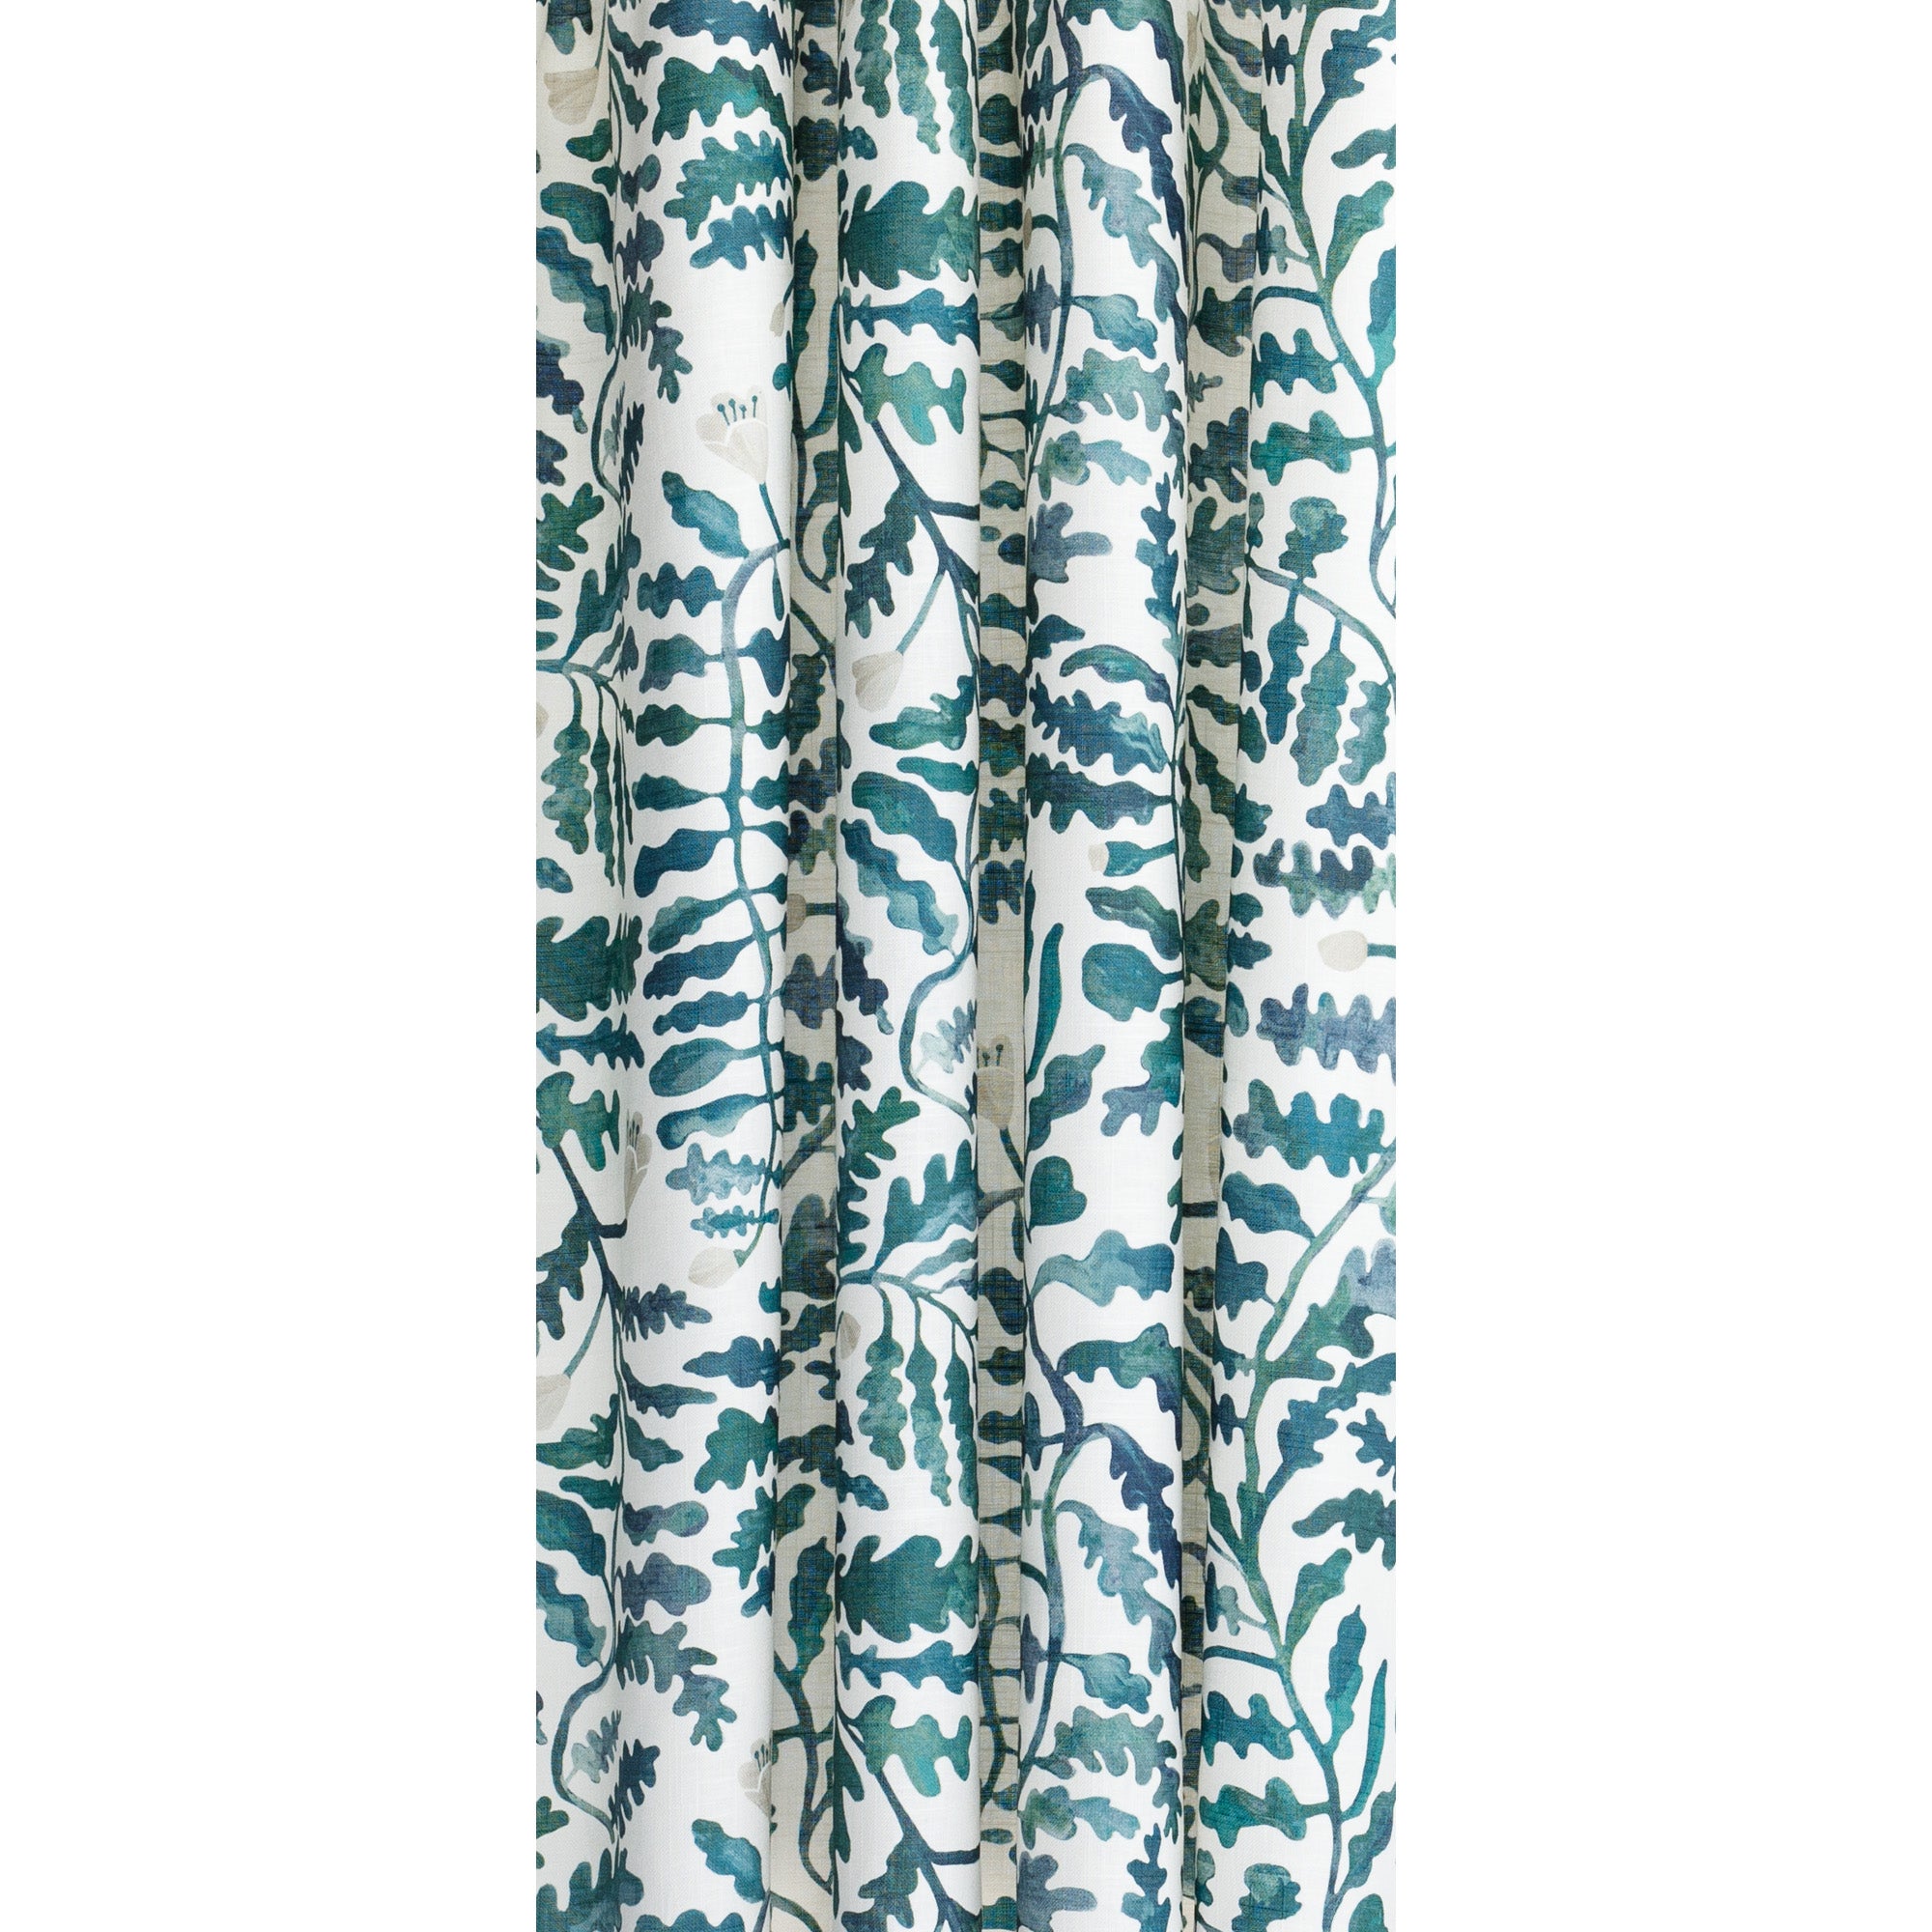 a teal and forest green and white leafy botanical linen blend drapery fabric